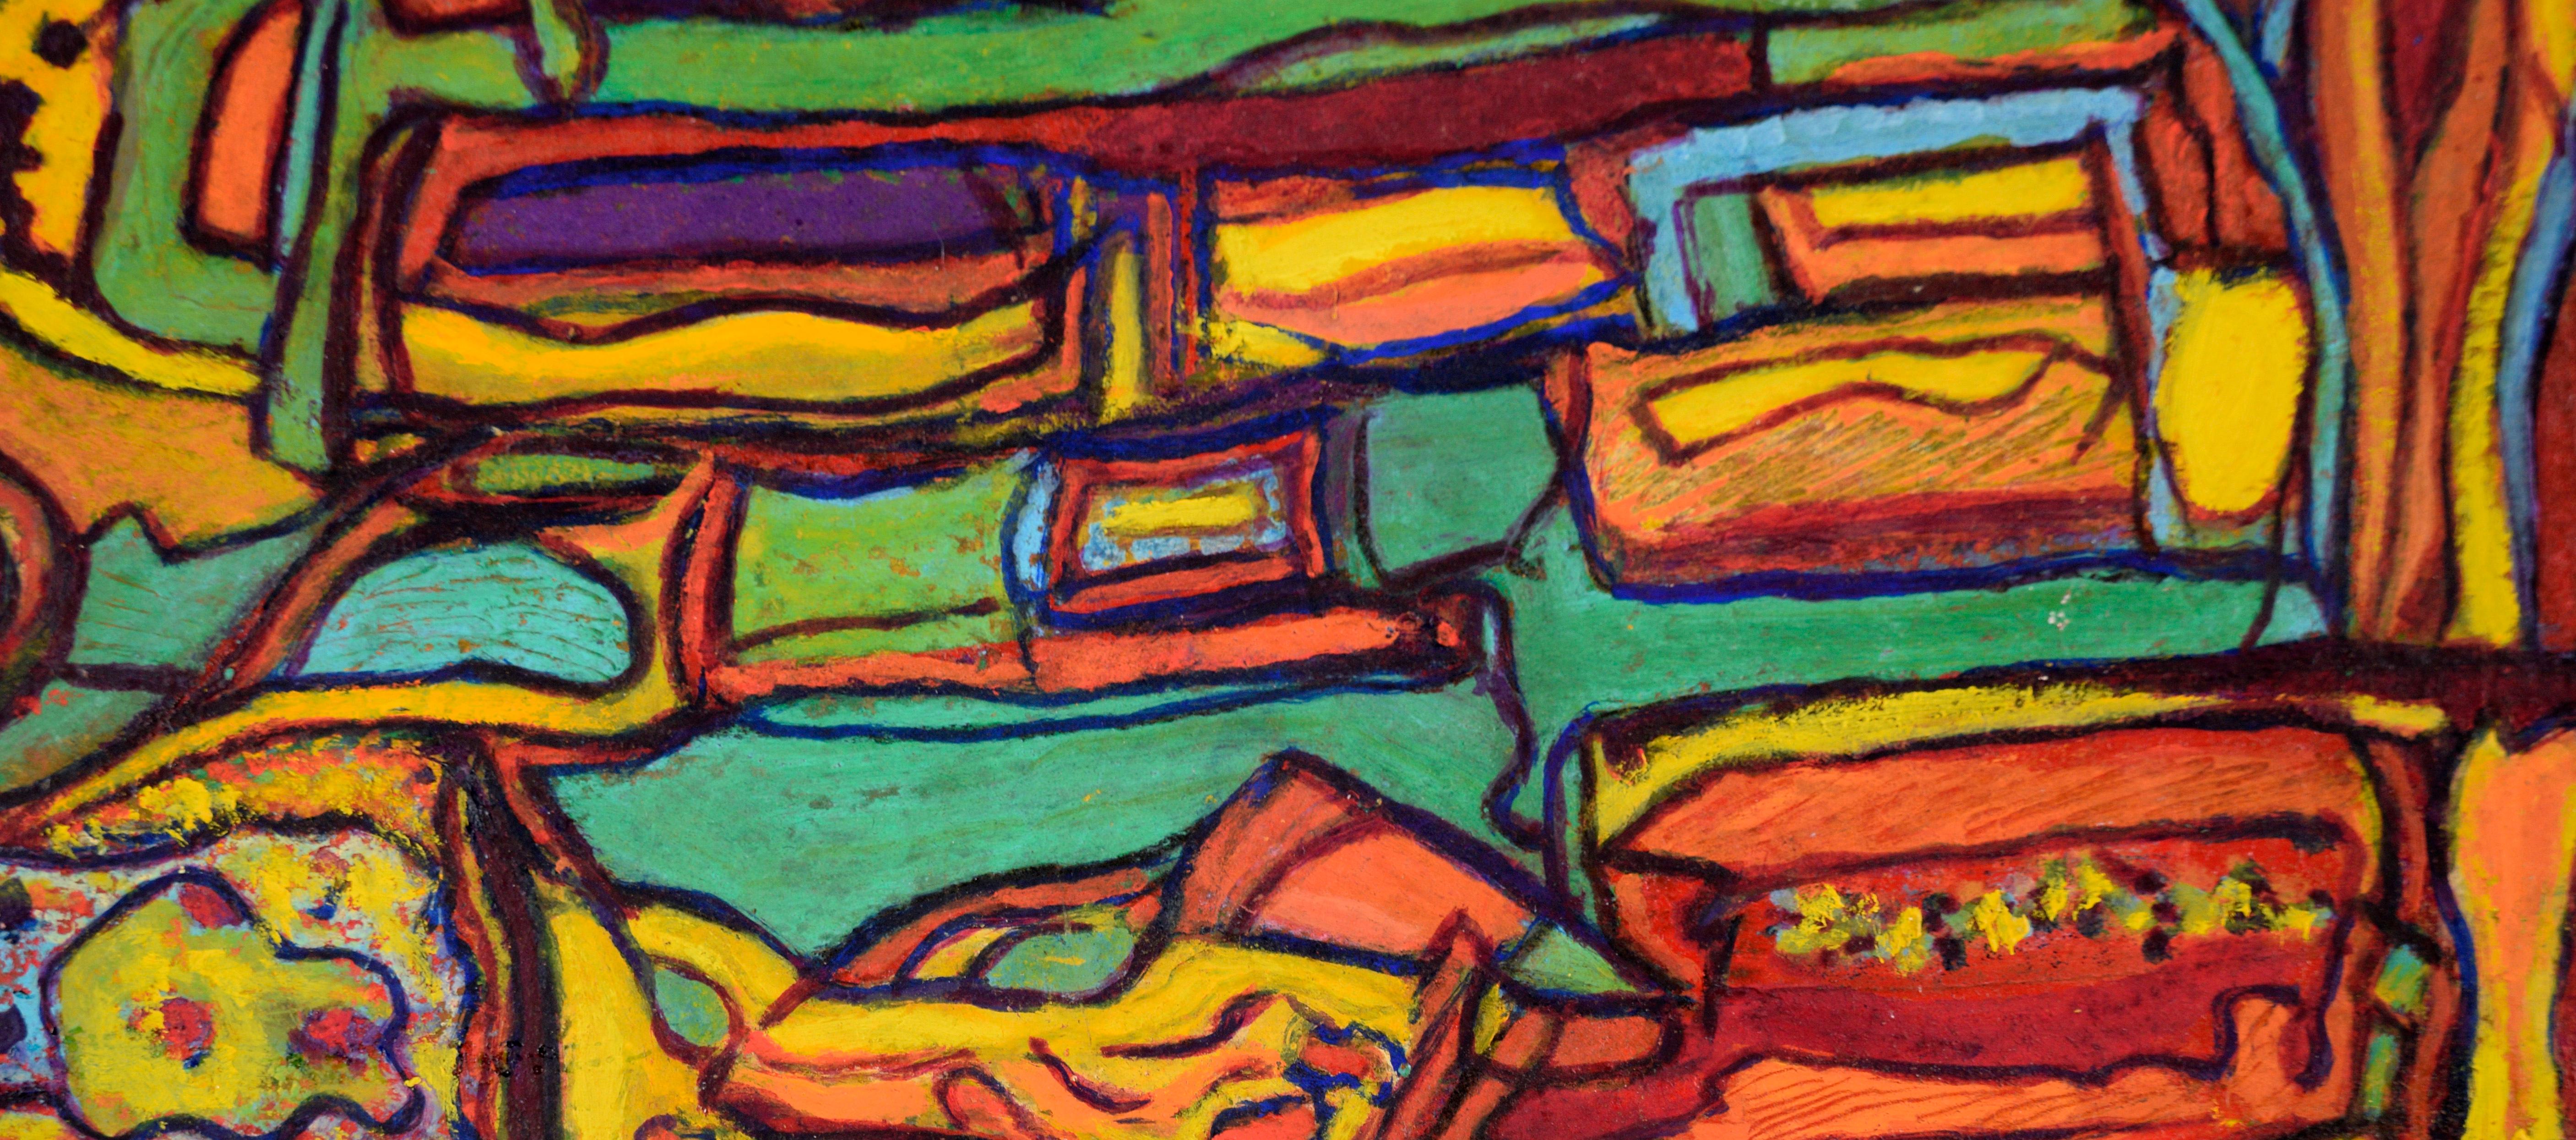 Psychedelic Abstract in Yellow, Teal, and Orange - Oil on Paper For Sale 1